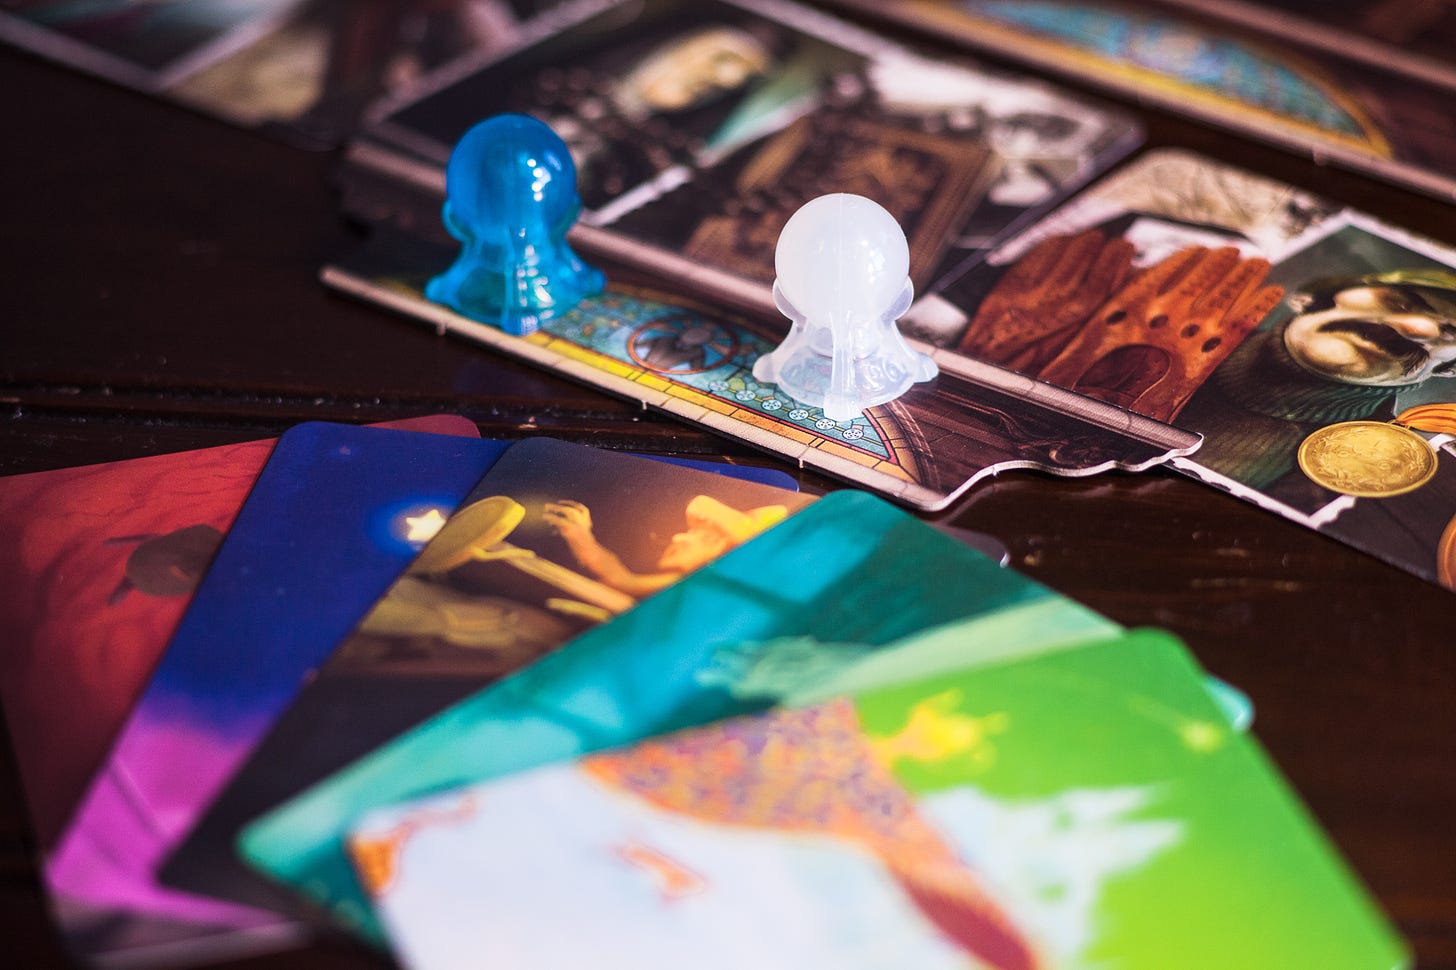 The board game Mysterium being played. Several cards are in front, and the focus is on player tokens.